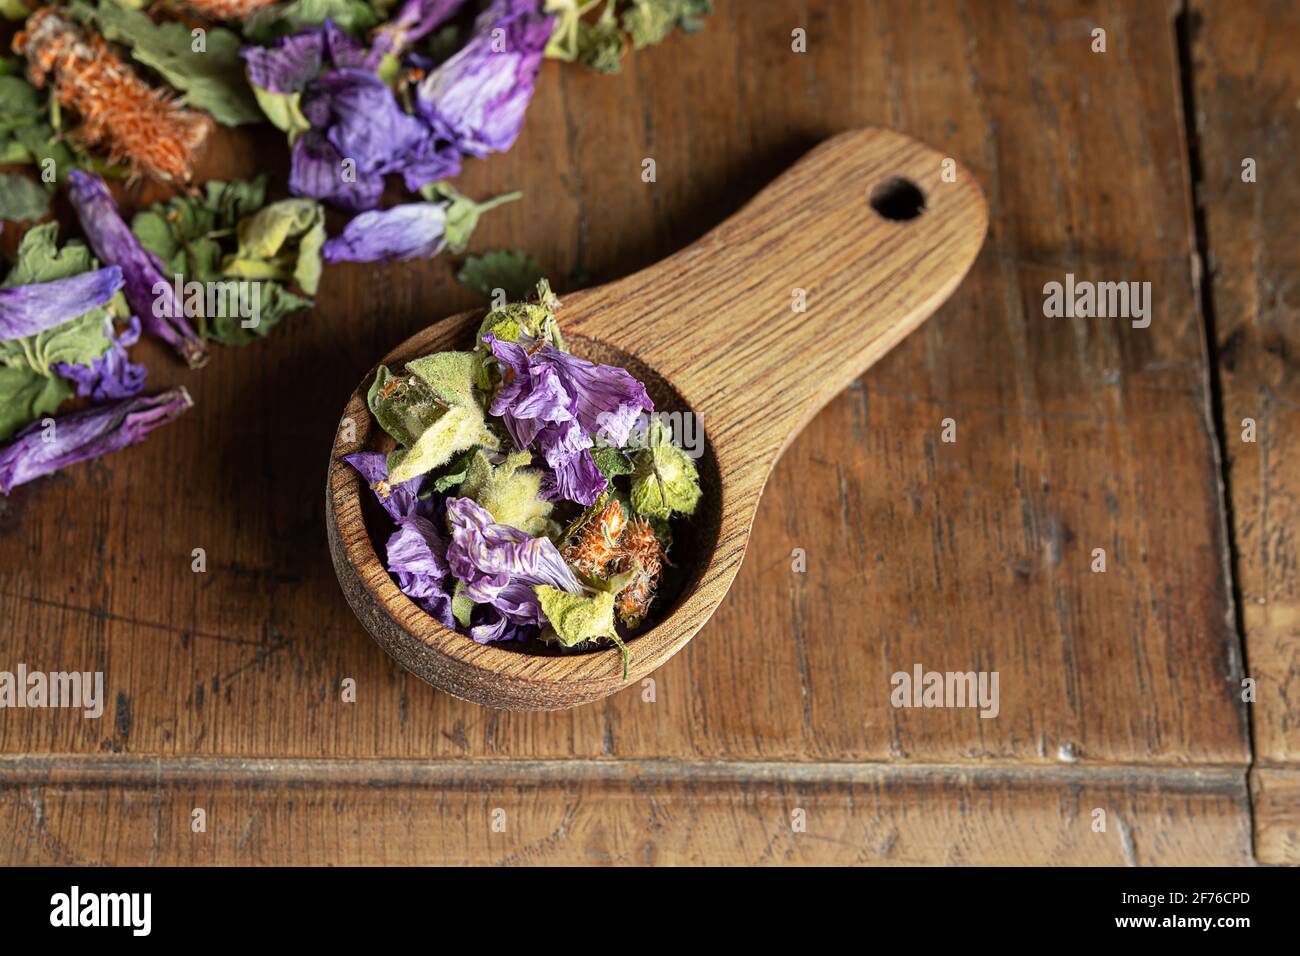 Cough herbal tea in a wooden spoon- thyme, green anise, ground ivy, pine bud, mallow flowers on a wooden background Stock Photo